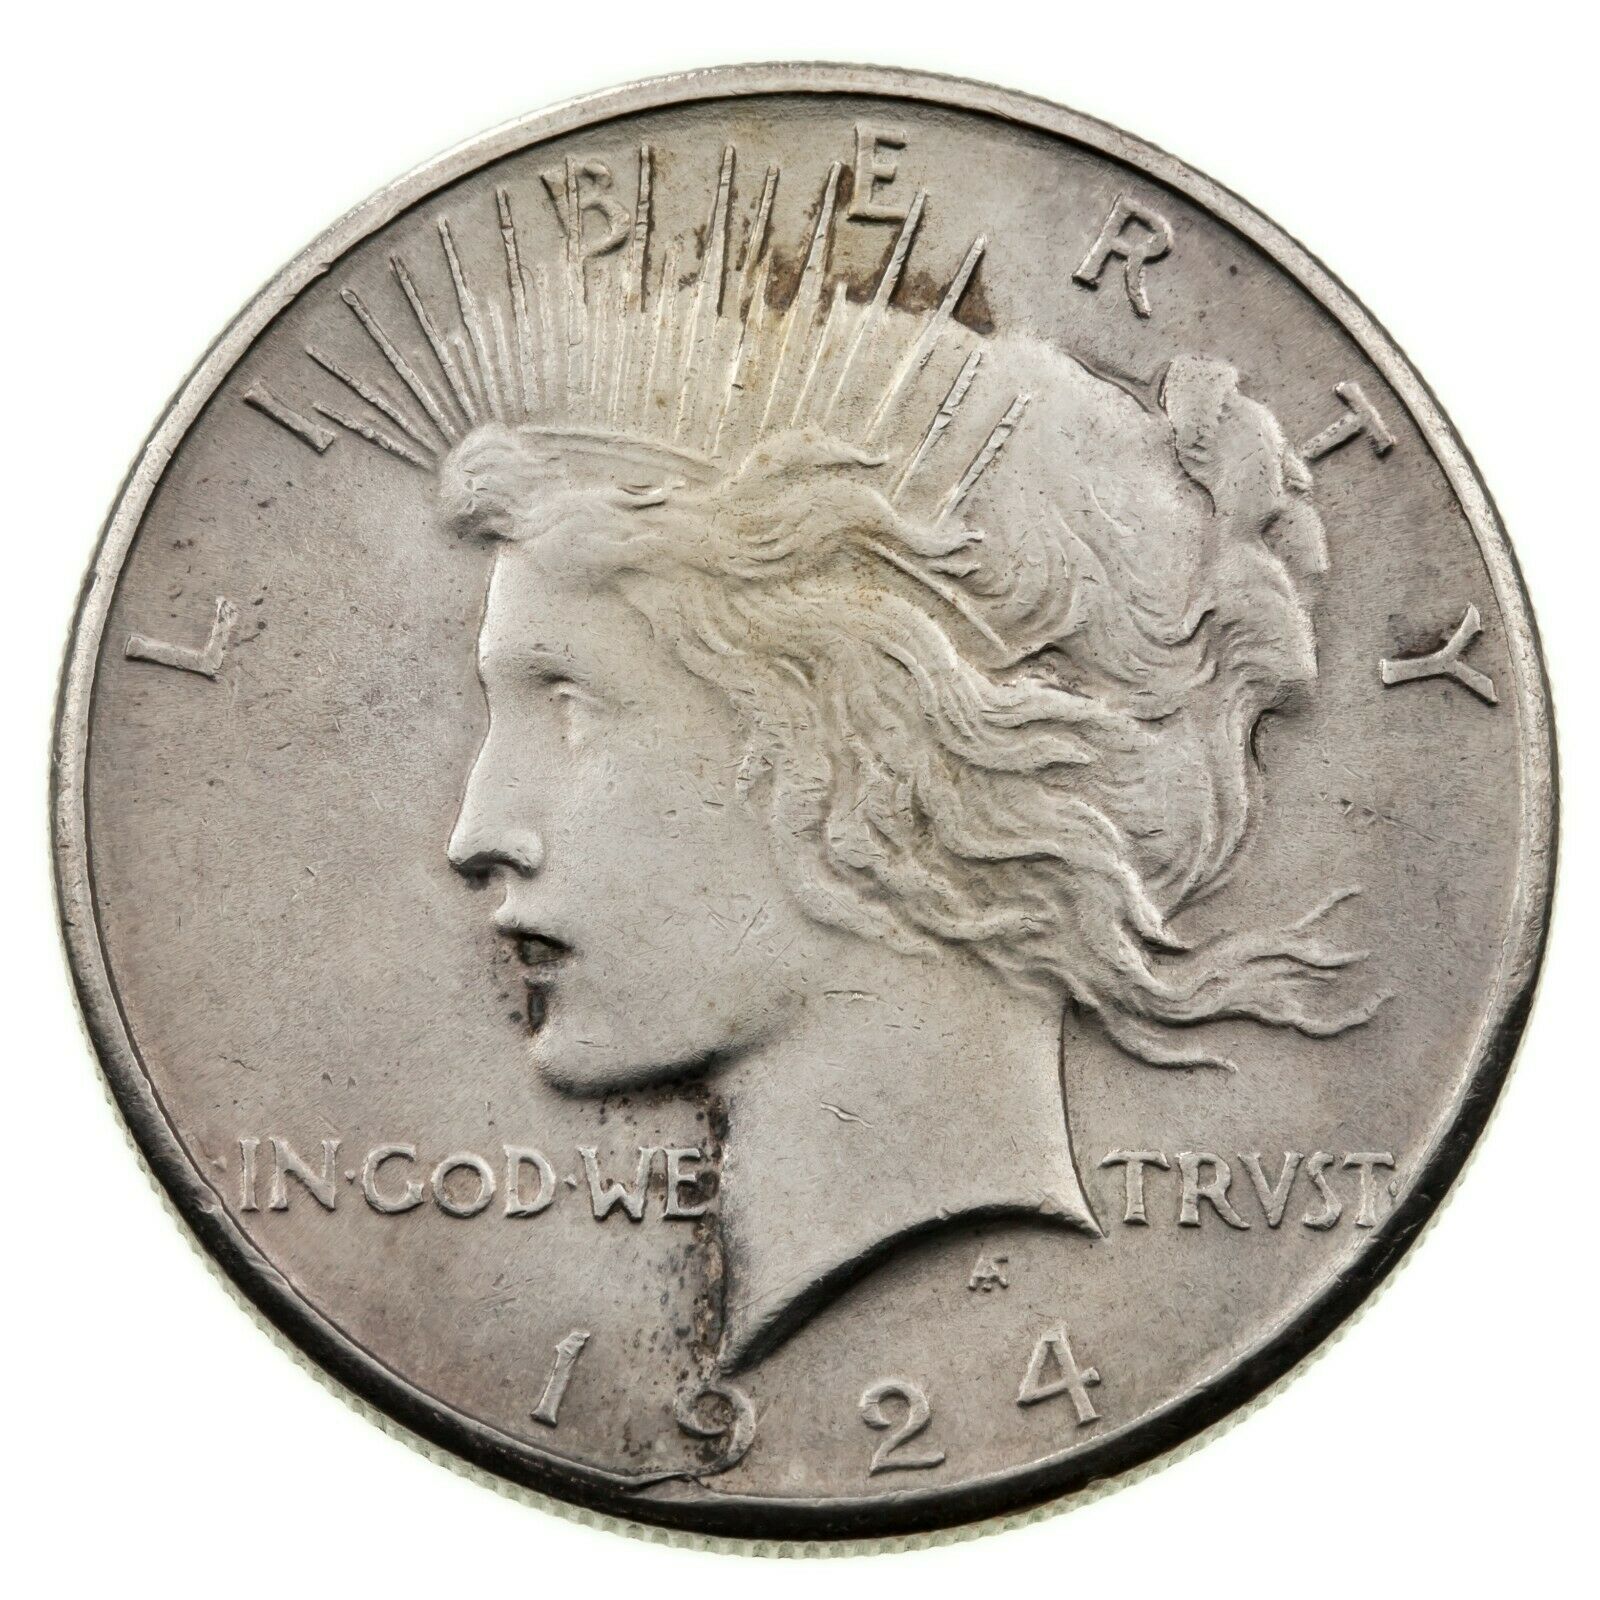 Primary image for 1924-S $1 Silver Peace Dollar in AU Condition, Mostly White, Some Light Toning